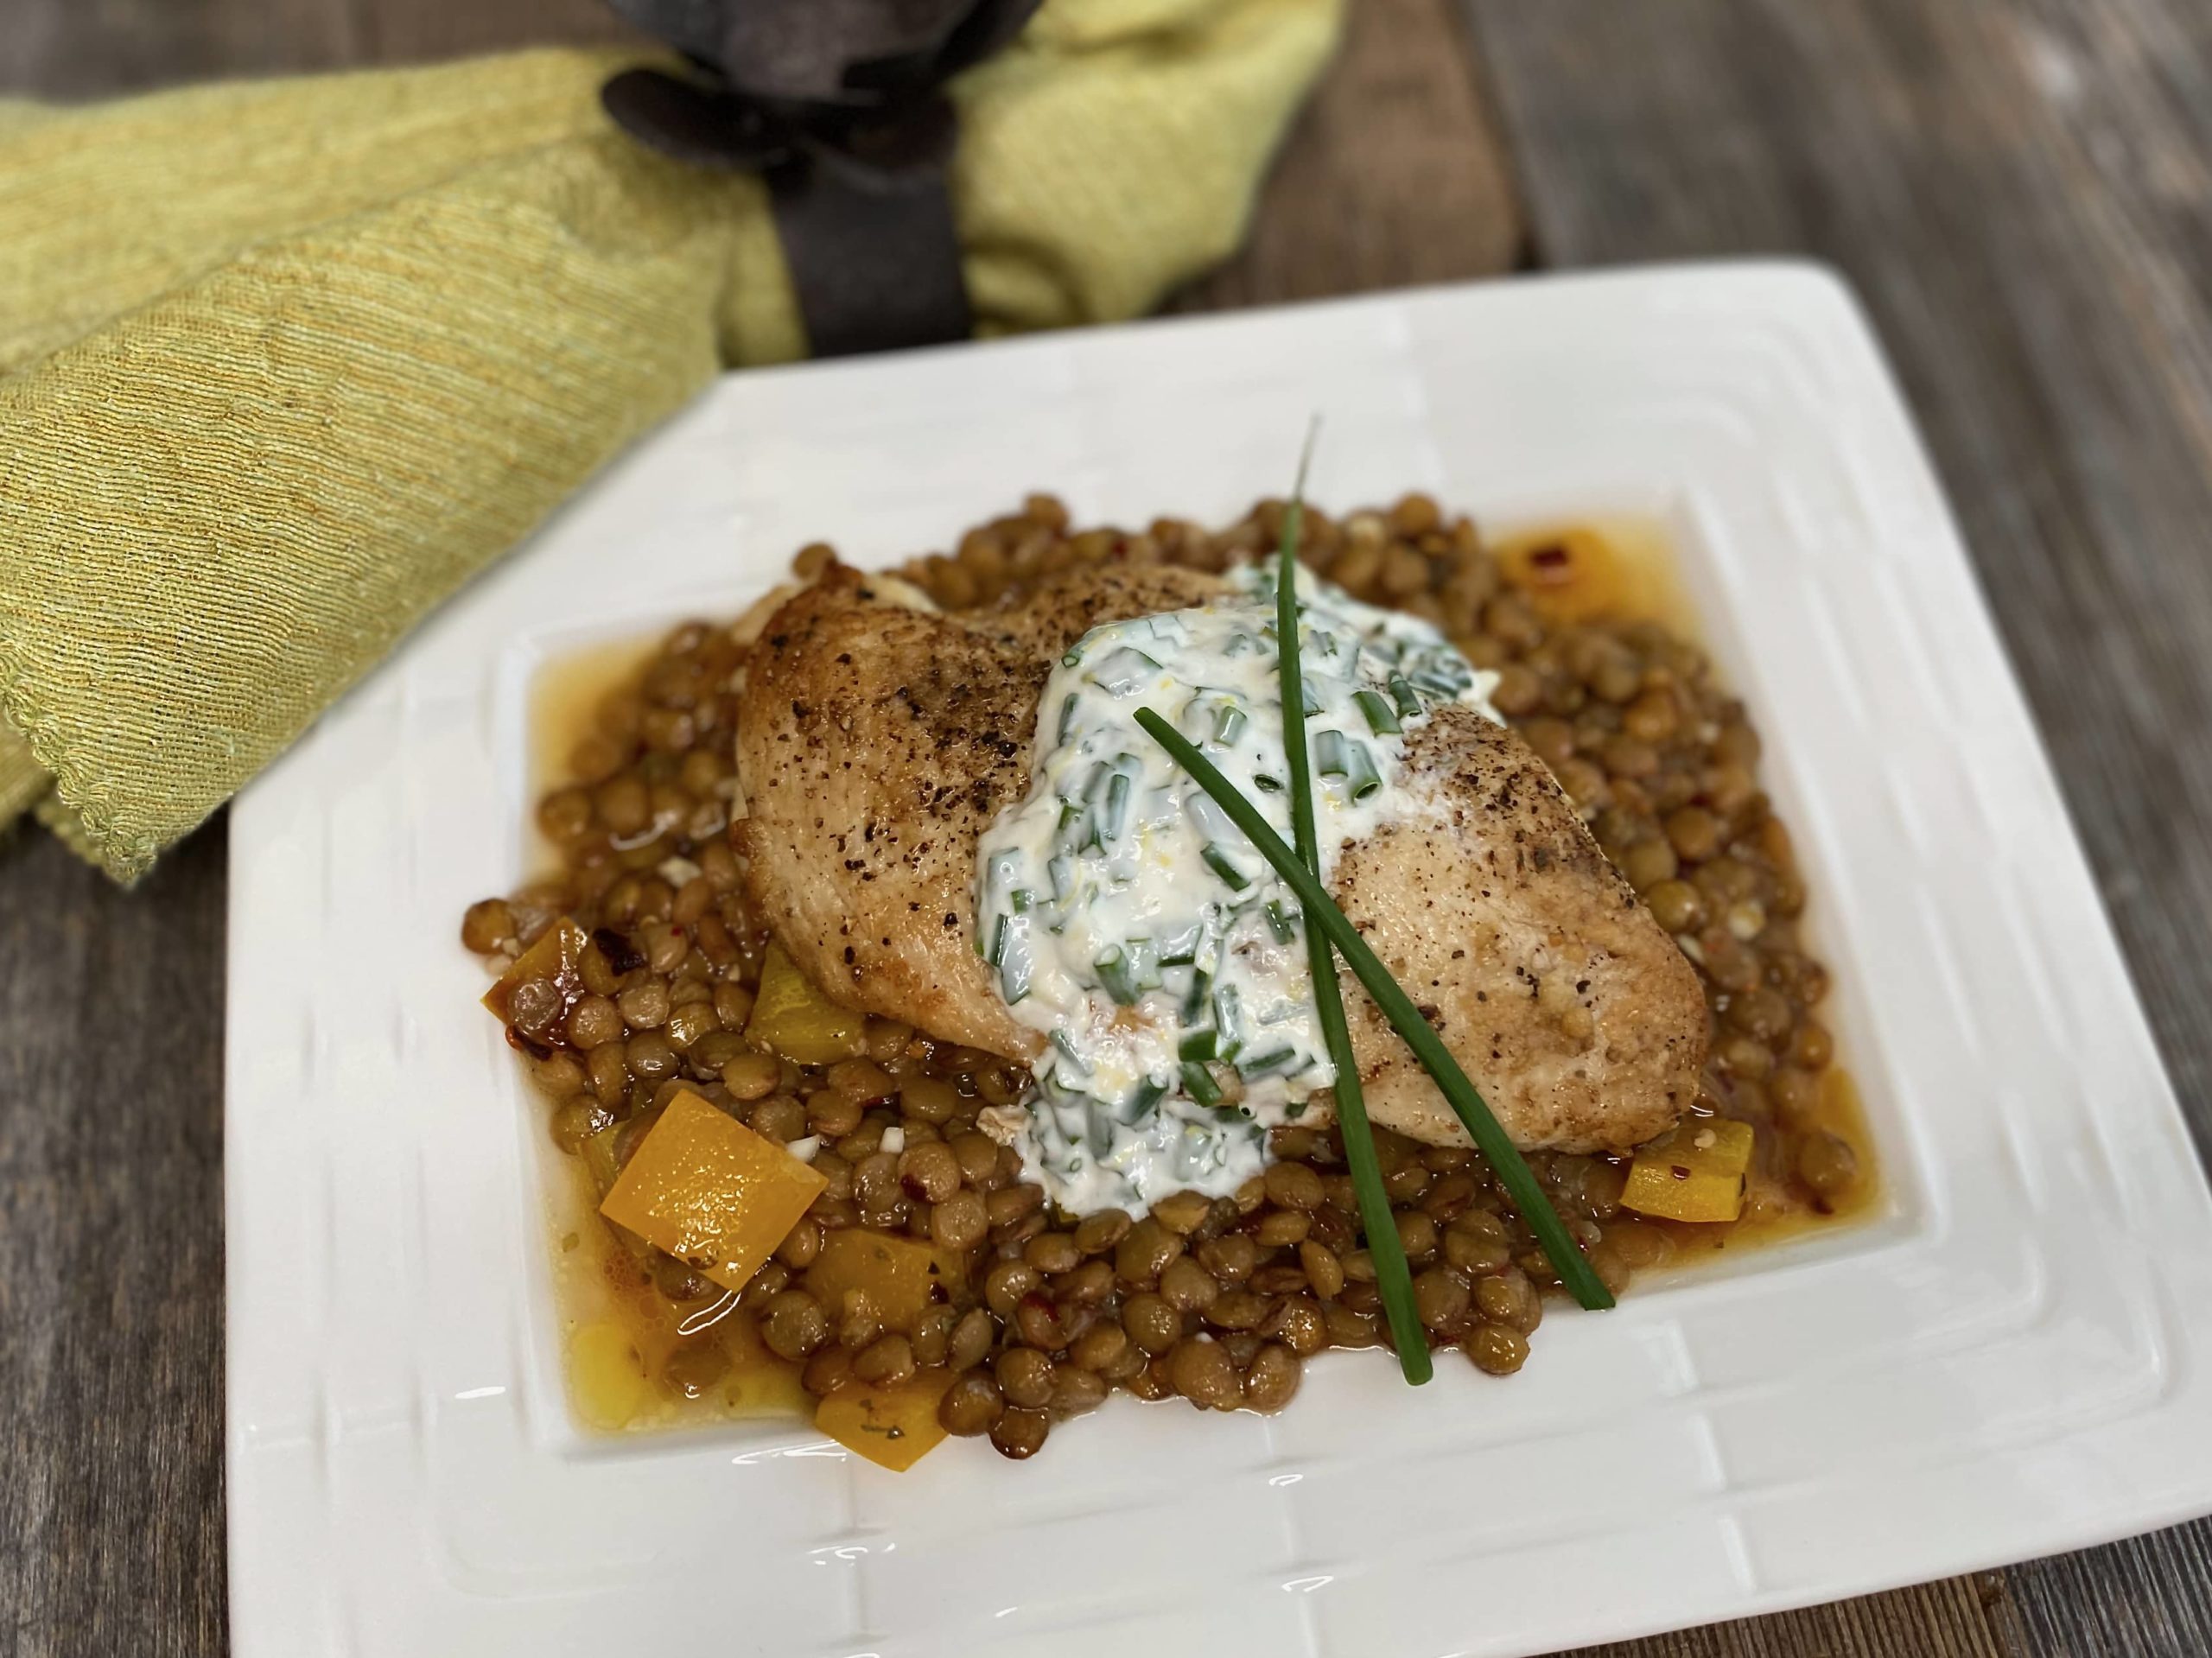 Life At The Table Lentils and Ladolemono Virtual Cooking Class | Pan-seared chicken with lentils and ladolemono on a white plate garnished with a chive and yogurt sauce.